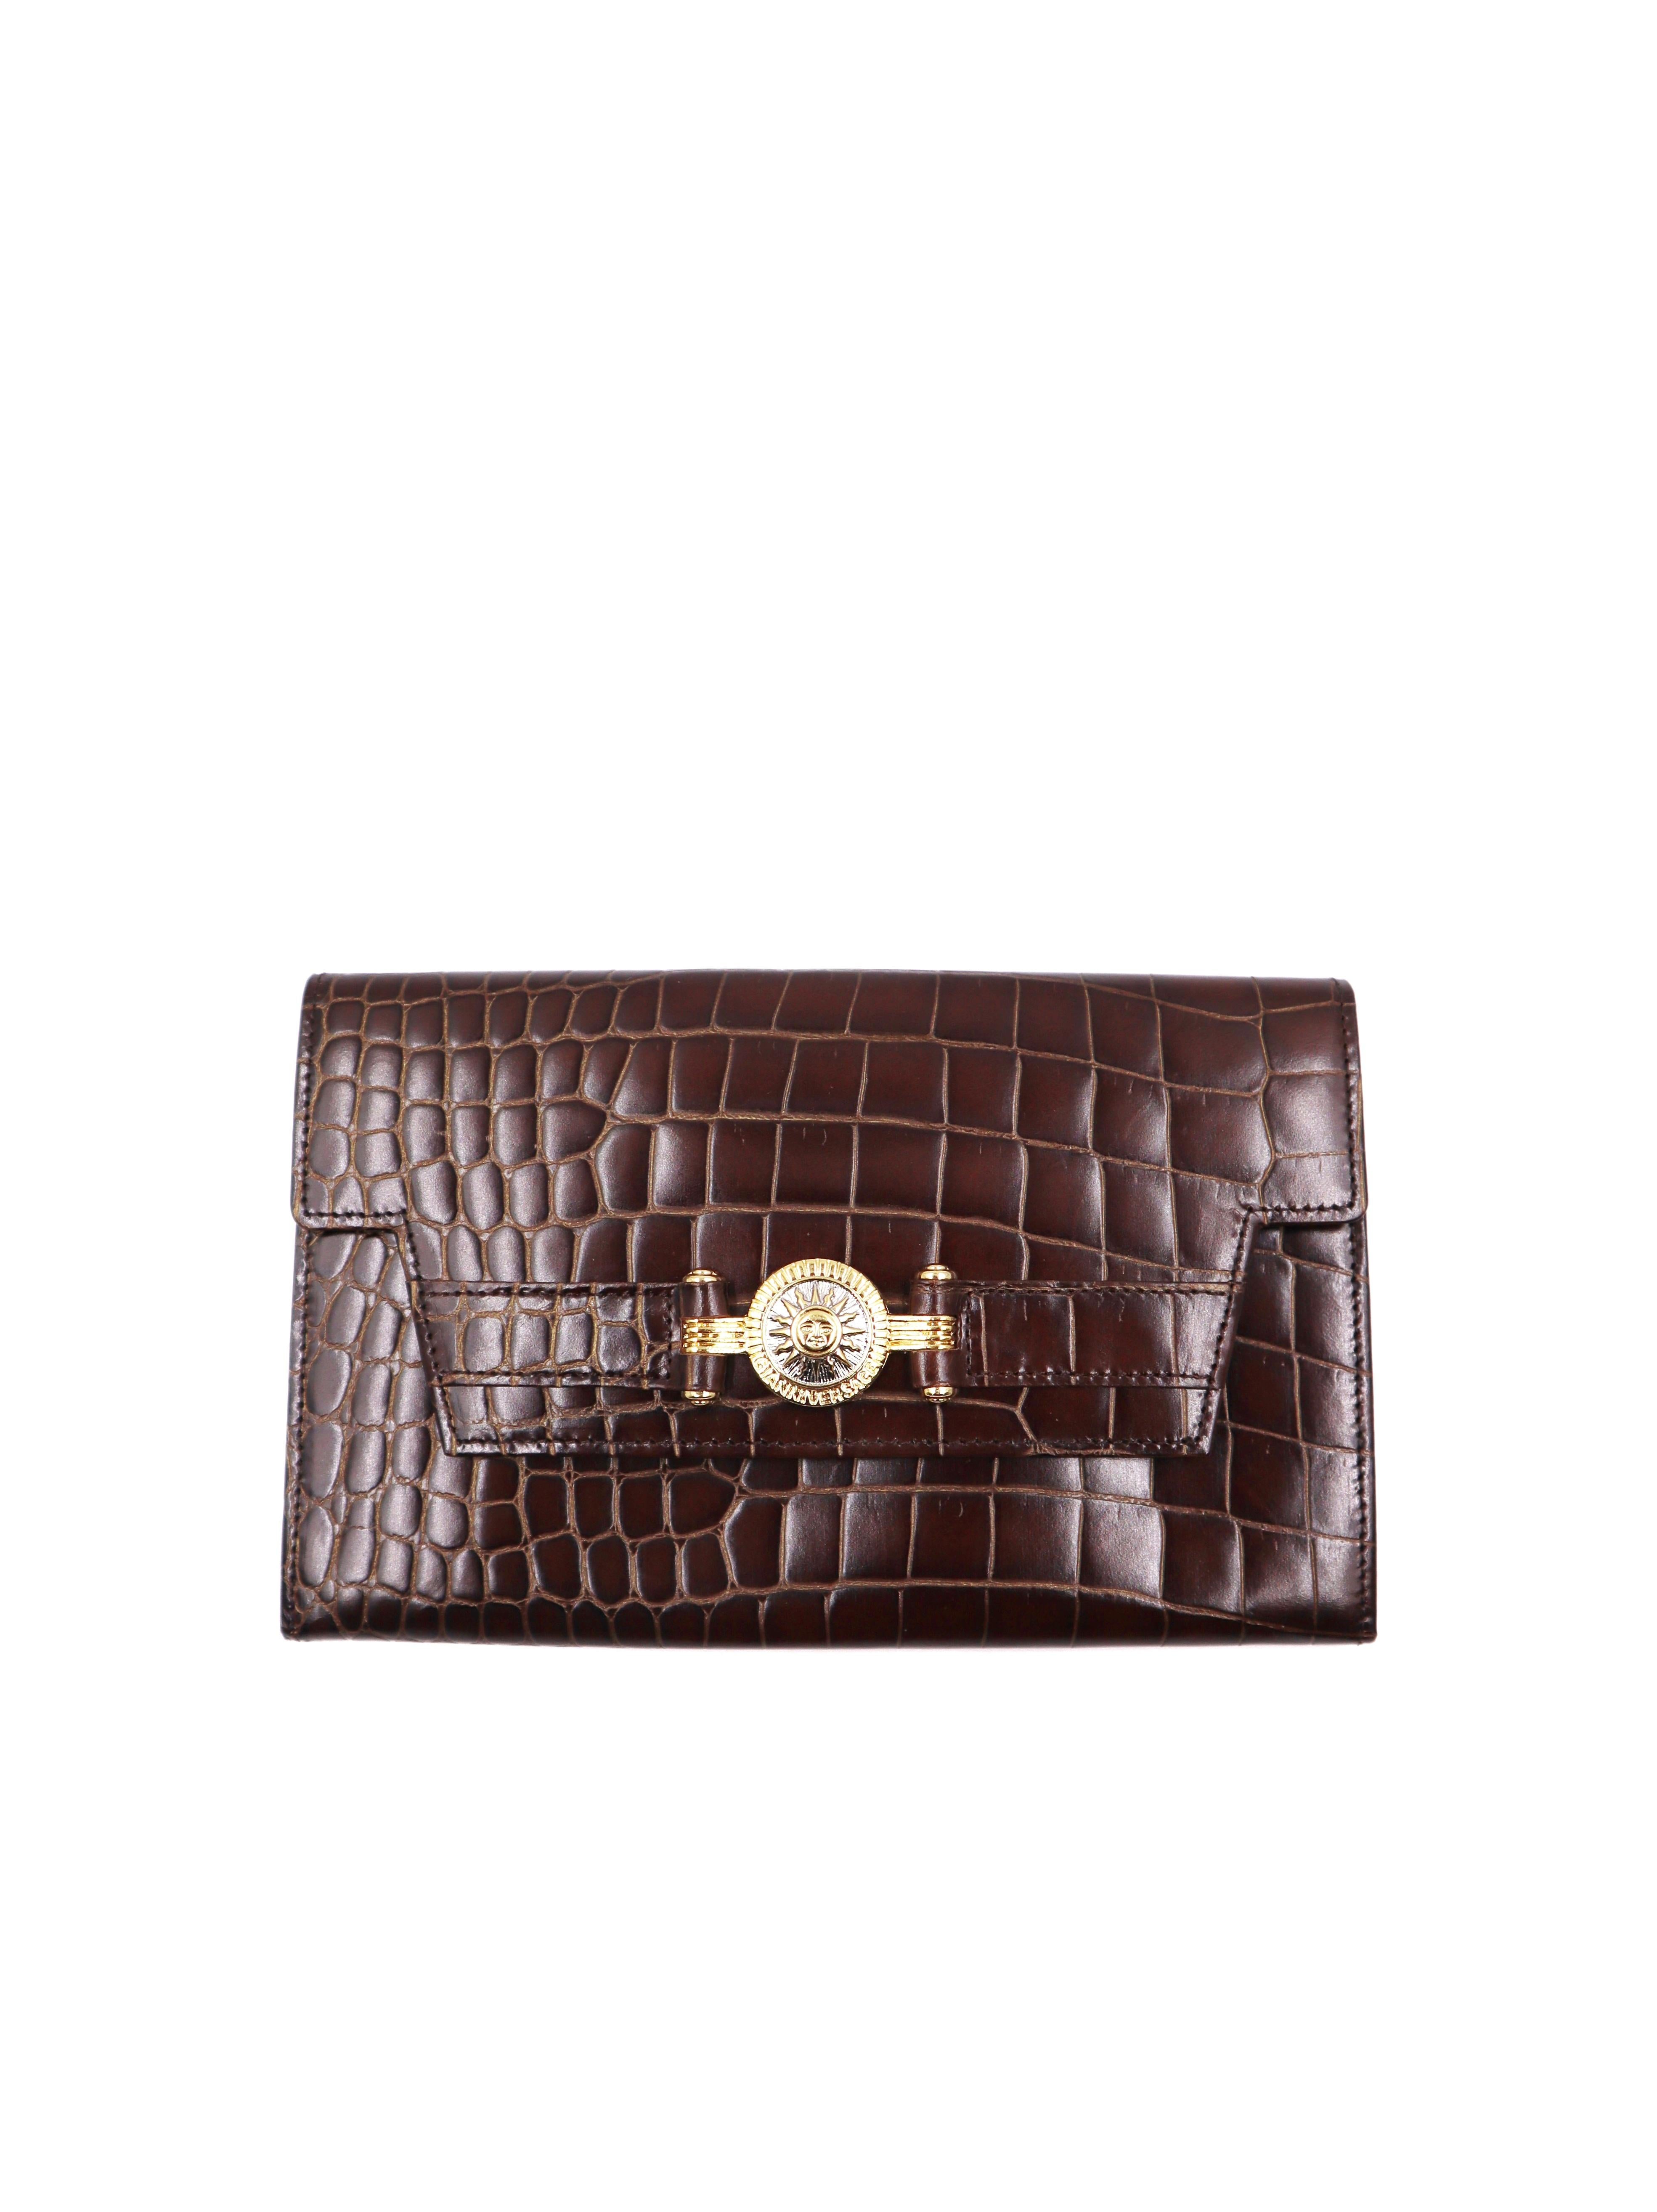 1990's GIANNI VERSACE CROC SUNBURST Women's Brown Patent CLUTCH Bag In Good Condition For Sale In PUTNEY, NSW